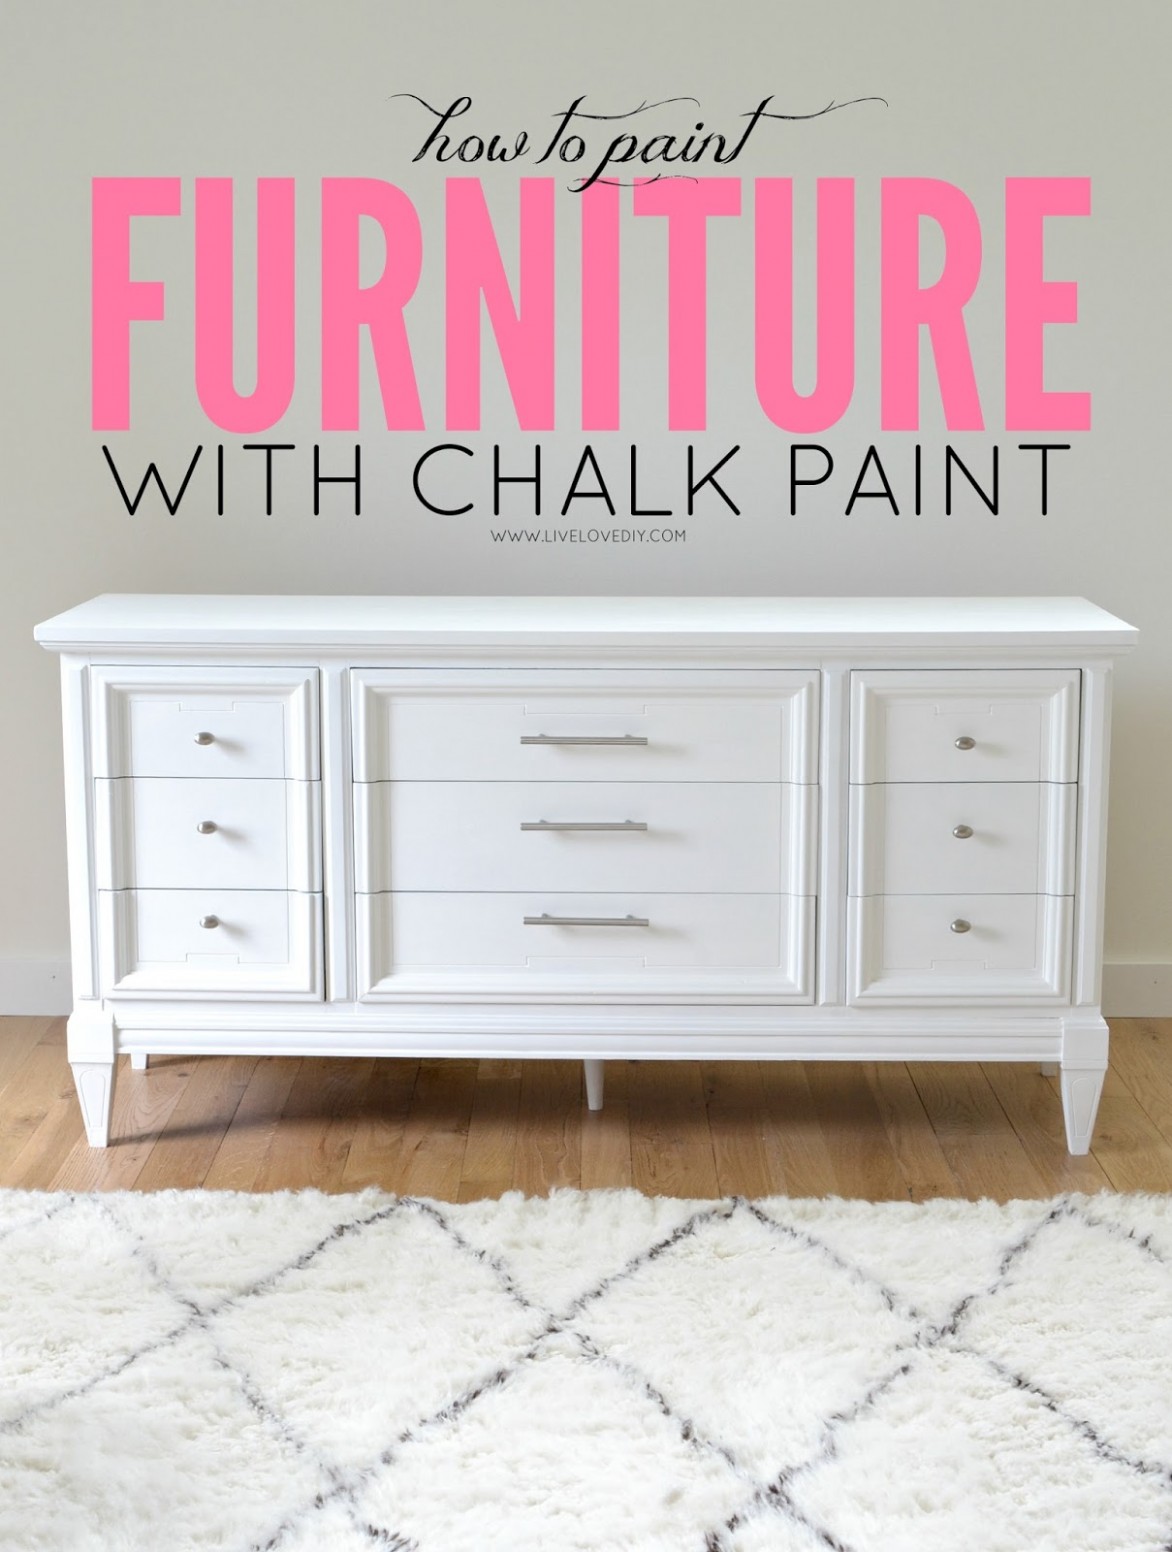 Livelovediy: How To Paint Furniture With Chalk Paint (and How To ..